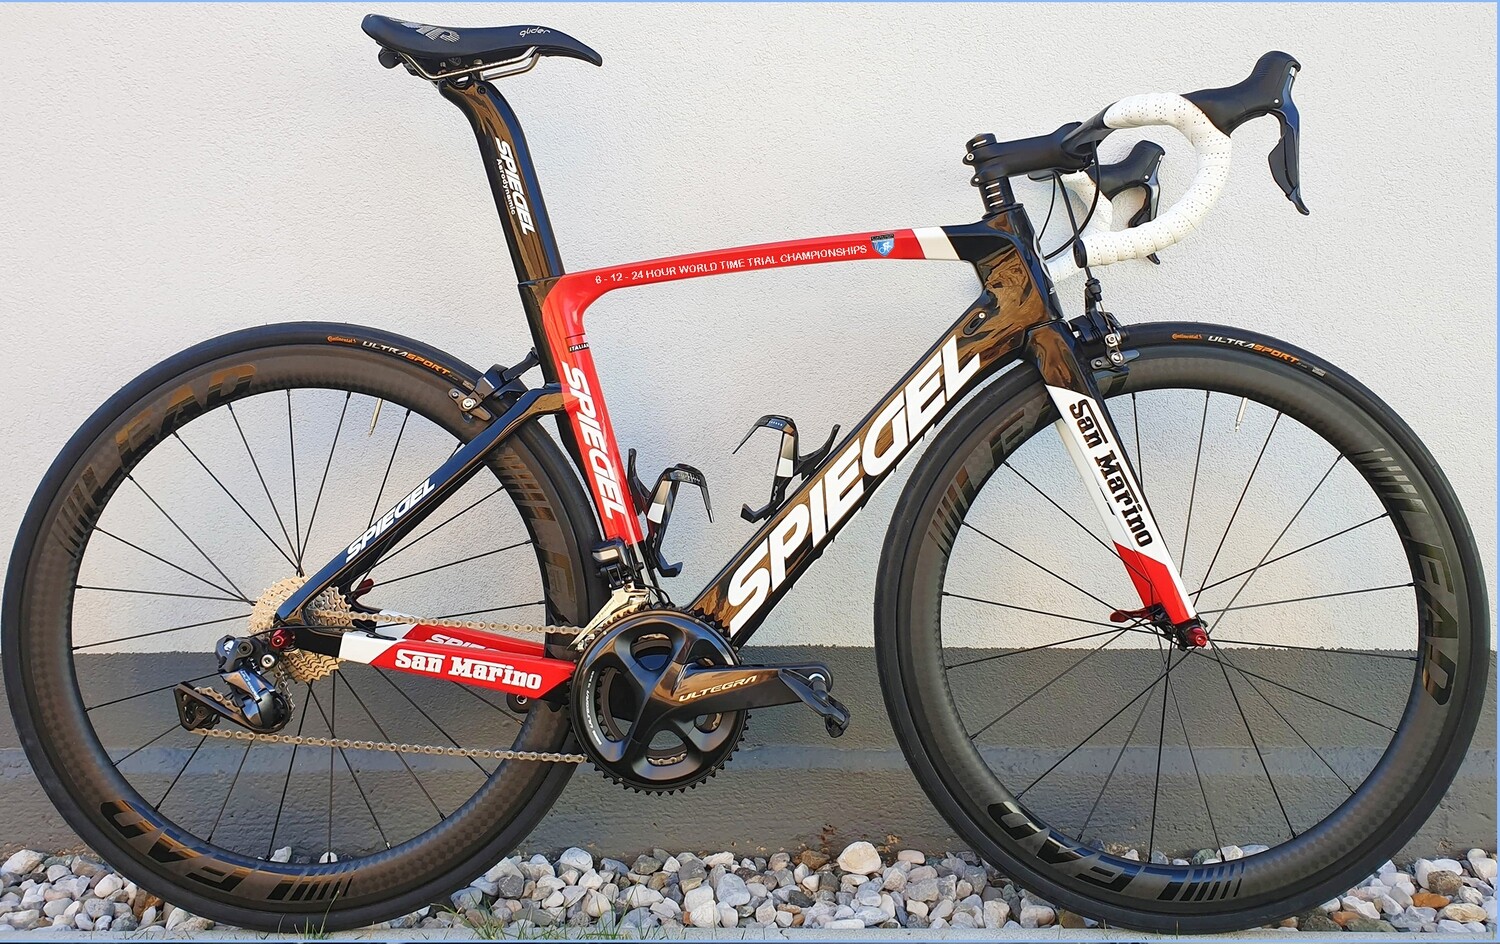 WTTC - Spiegel San Marino With Personalized CATEGORY WINNER Graphics - Rim Brake Compatible (Non-USA Shipping)